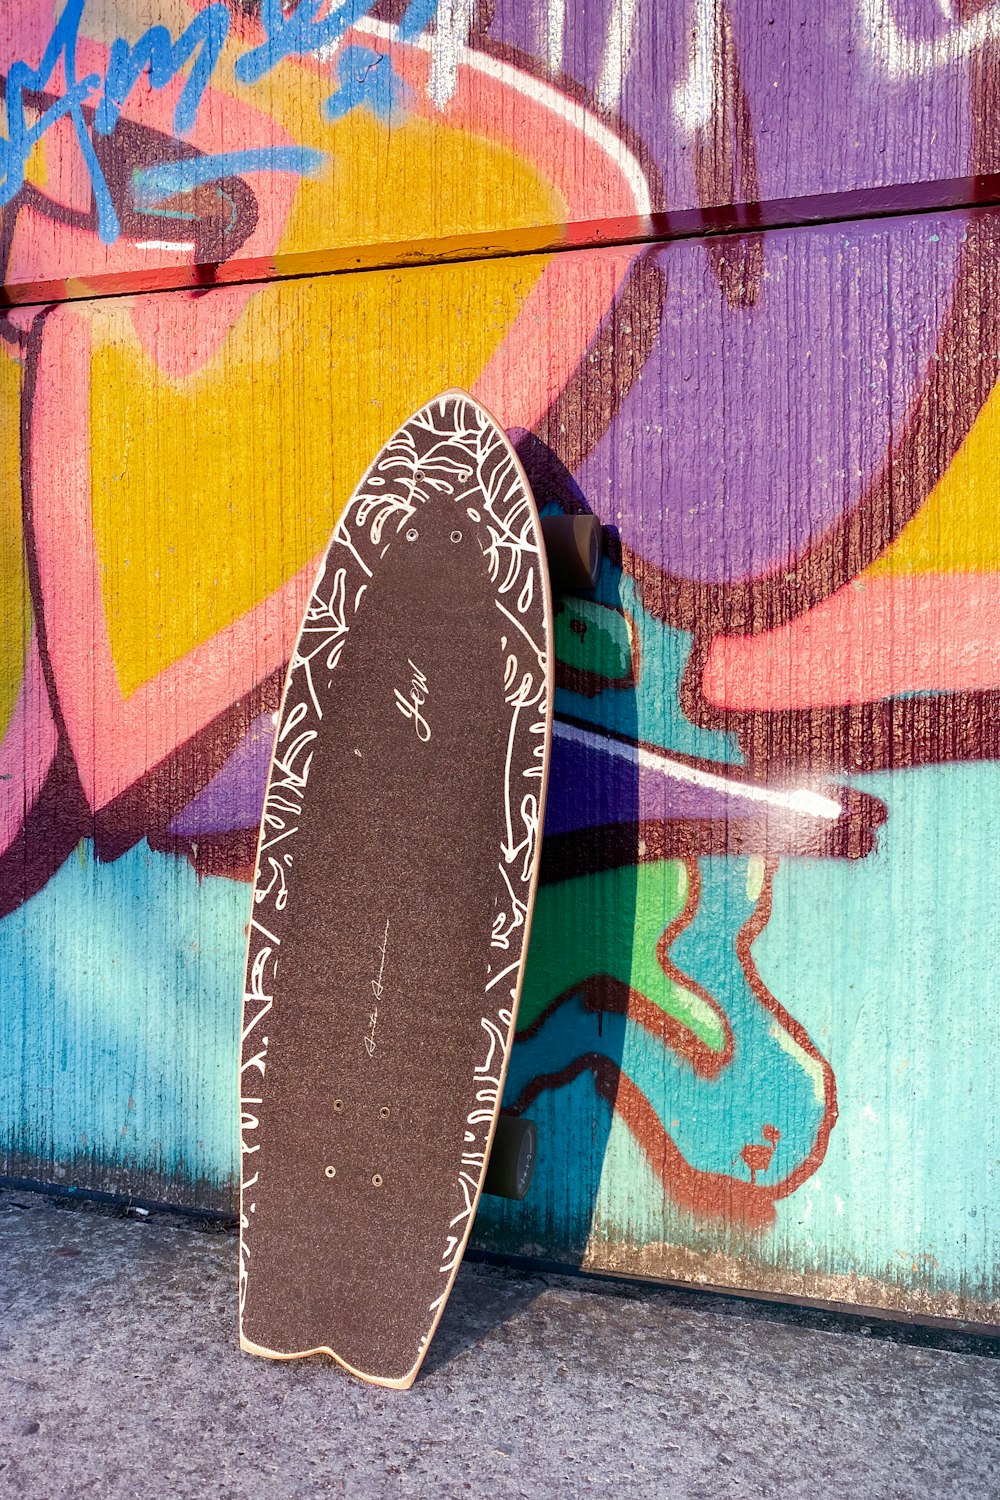 a skateboard leaning against a wall covered in graffiti